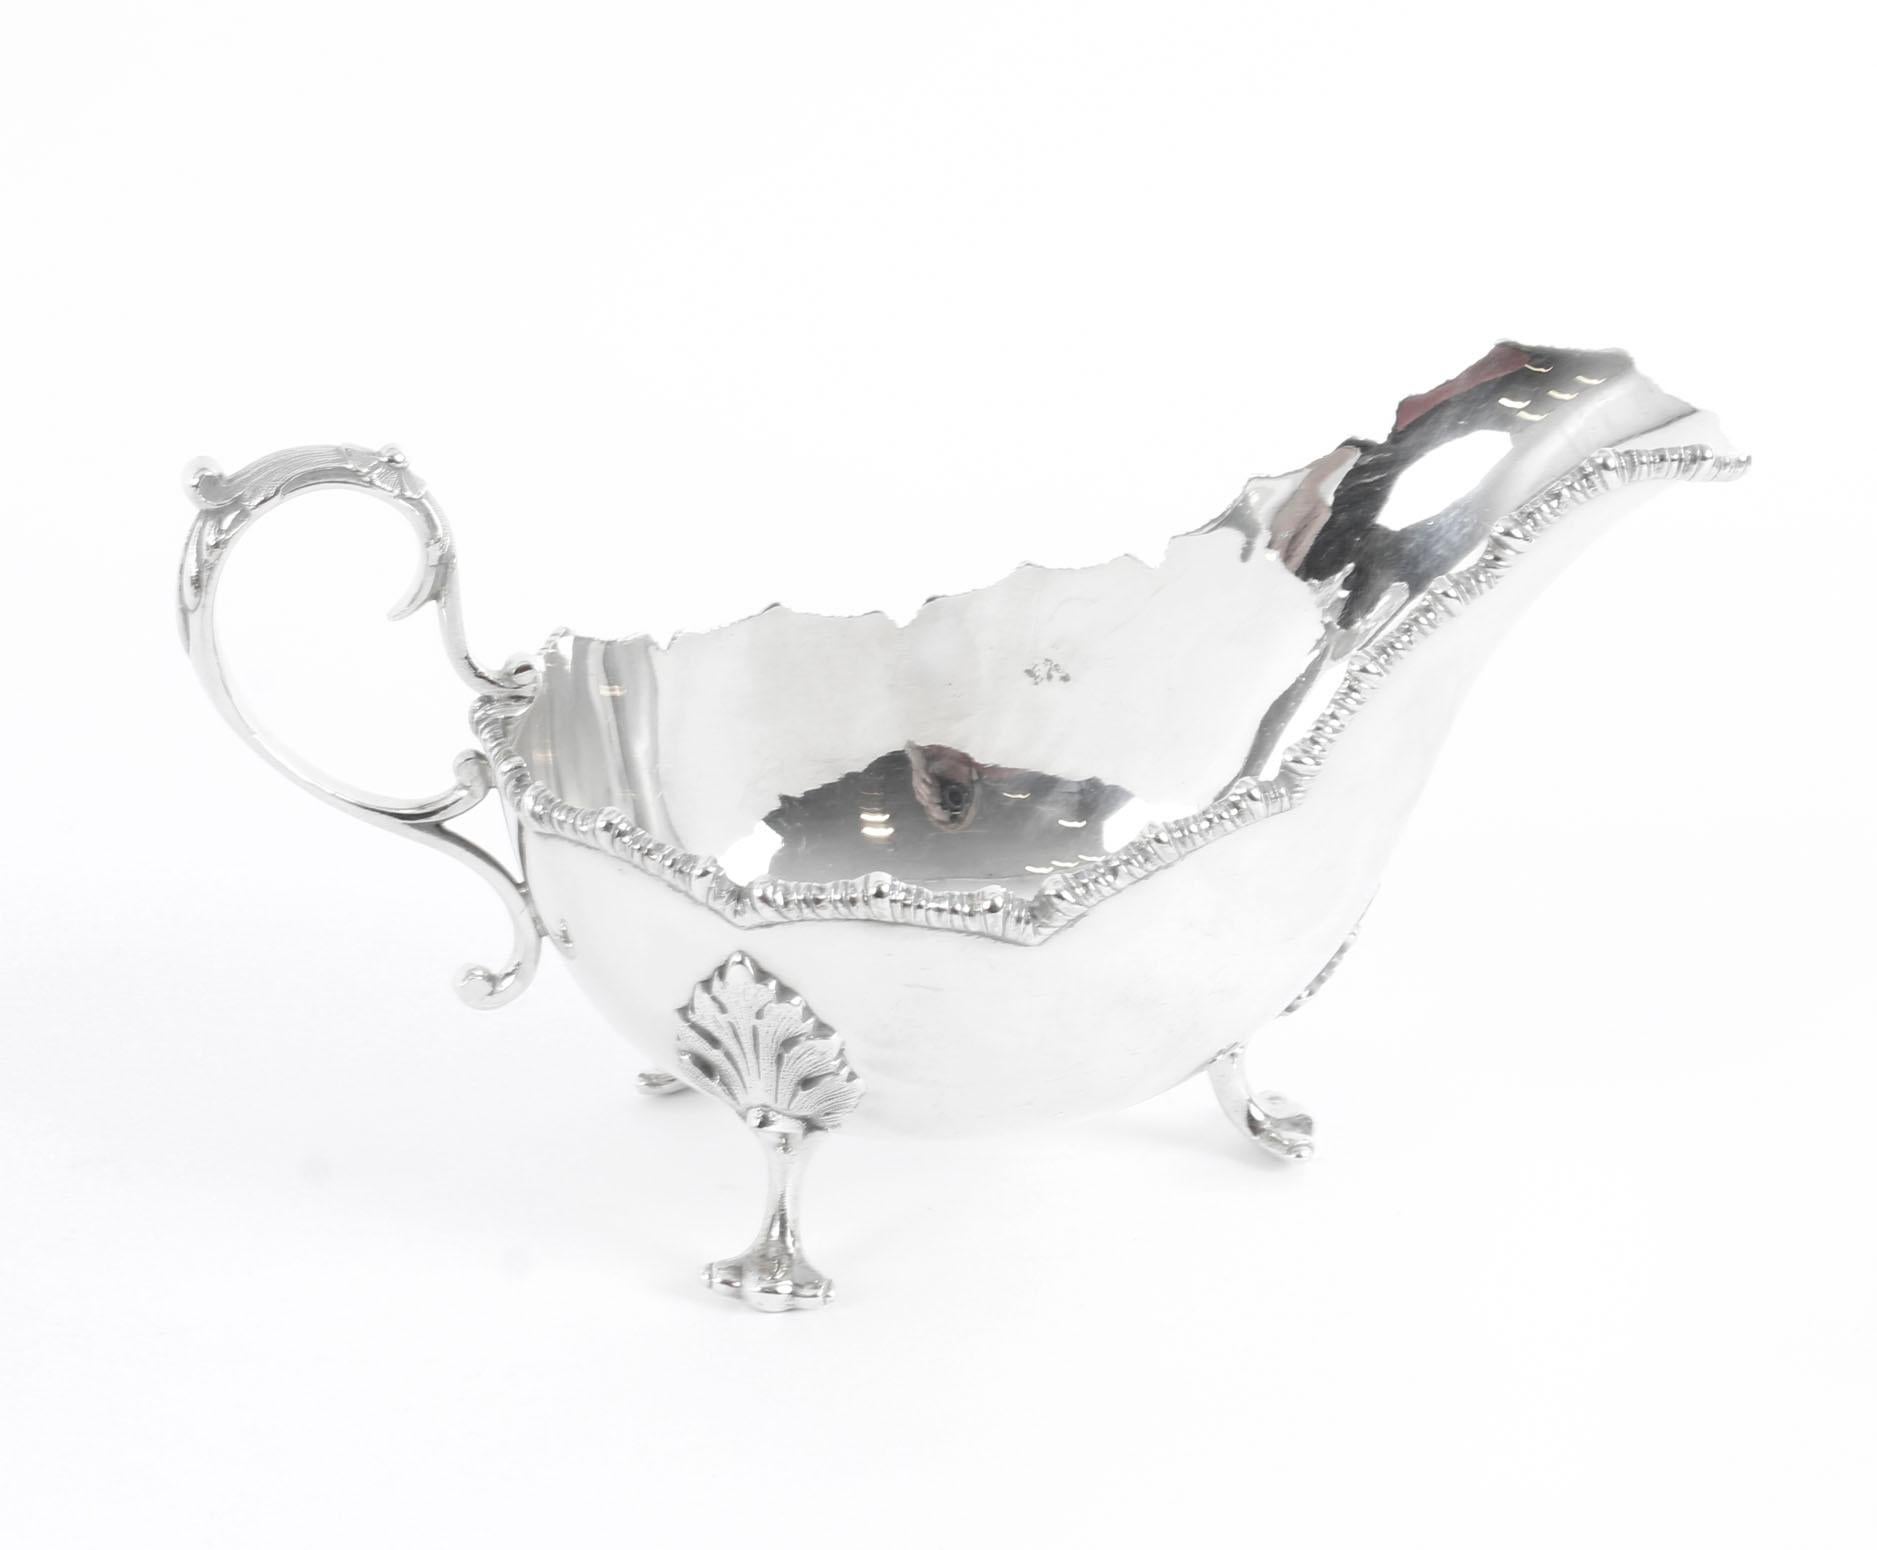 This is a stunning English Victorian pair of silver plated sauce boats, circa 1880 in date.

Made of thick gauge silver plate, the sauce boats bear the makers' mark of the highly sought after silversmiths, James Dixon & Sons of Sheffield. 
 
The